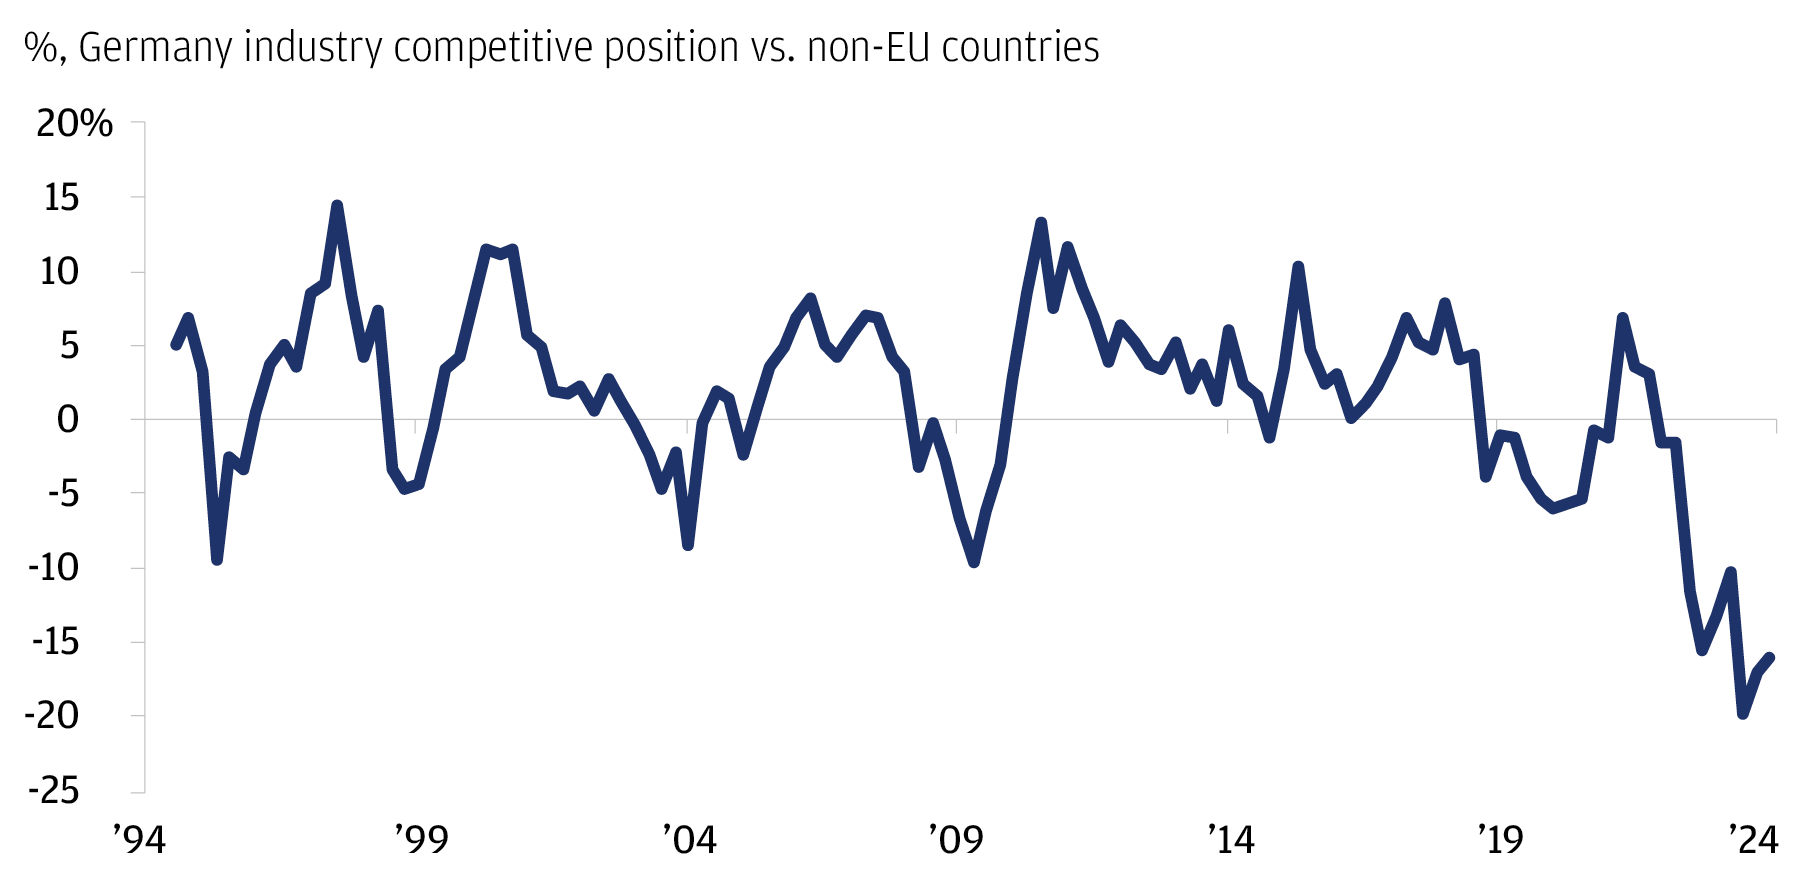 The chart describes Germany industry competitive position vs. non-EU countries as in net % of survey respondents saying an increase over the last three months vs. those saying a decrease over the last three months. 